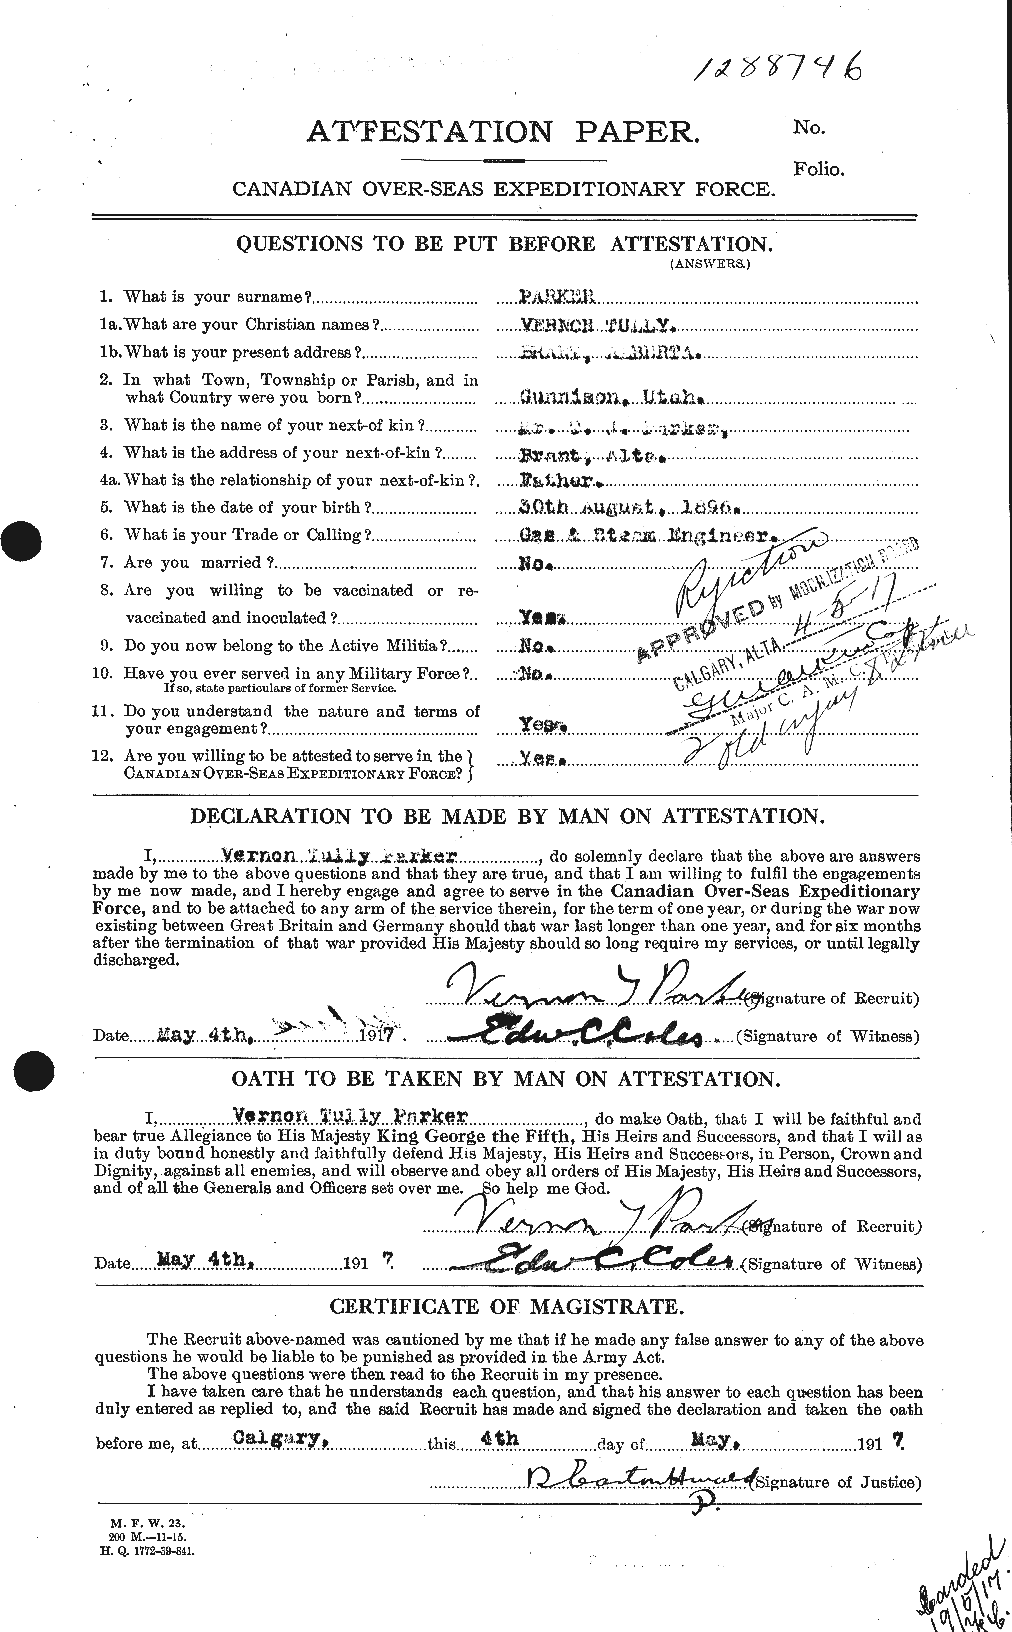 Personnel Records of the First World War - CEF 565678a